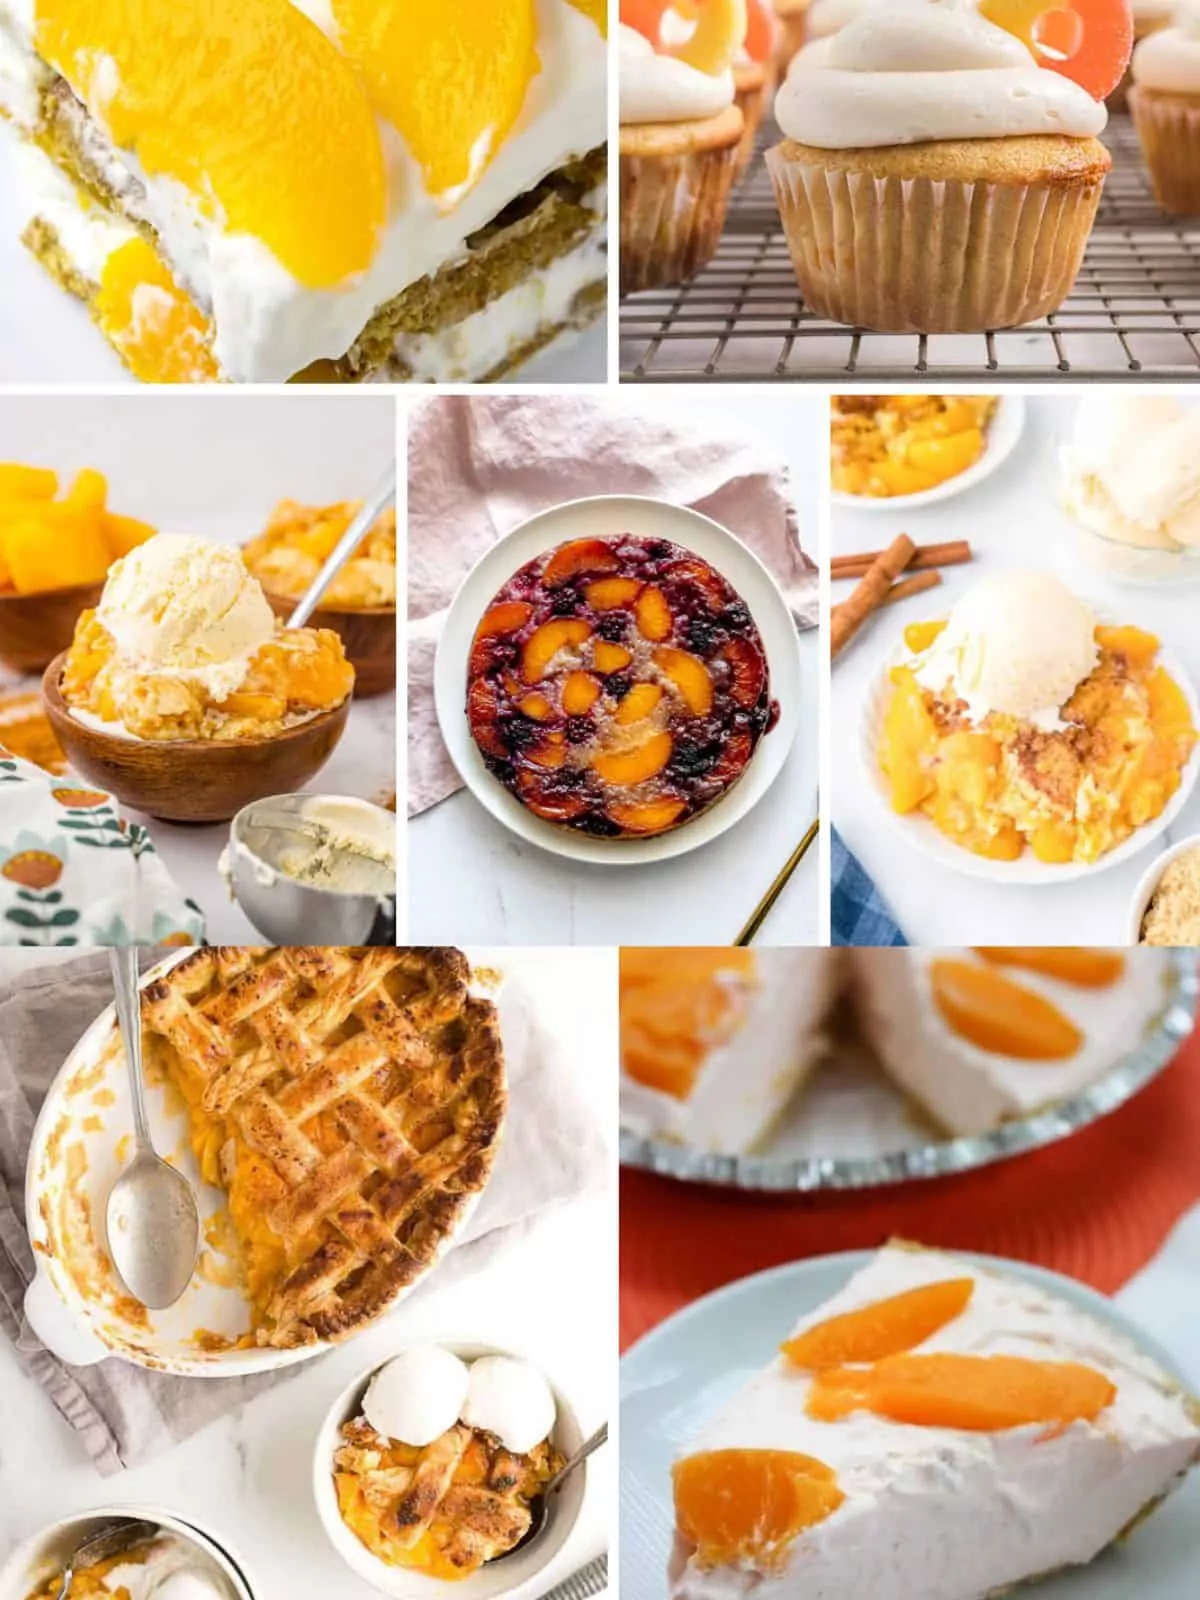 a collection of desserts made with canned peaches.